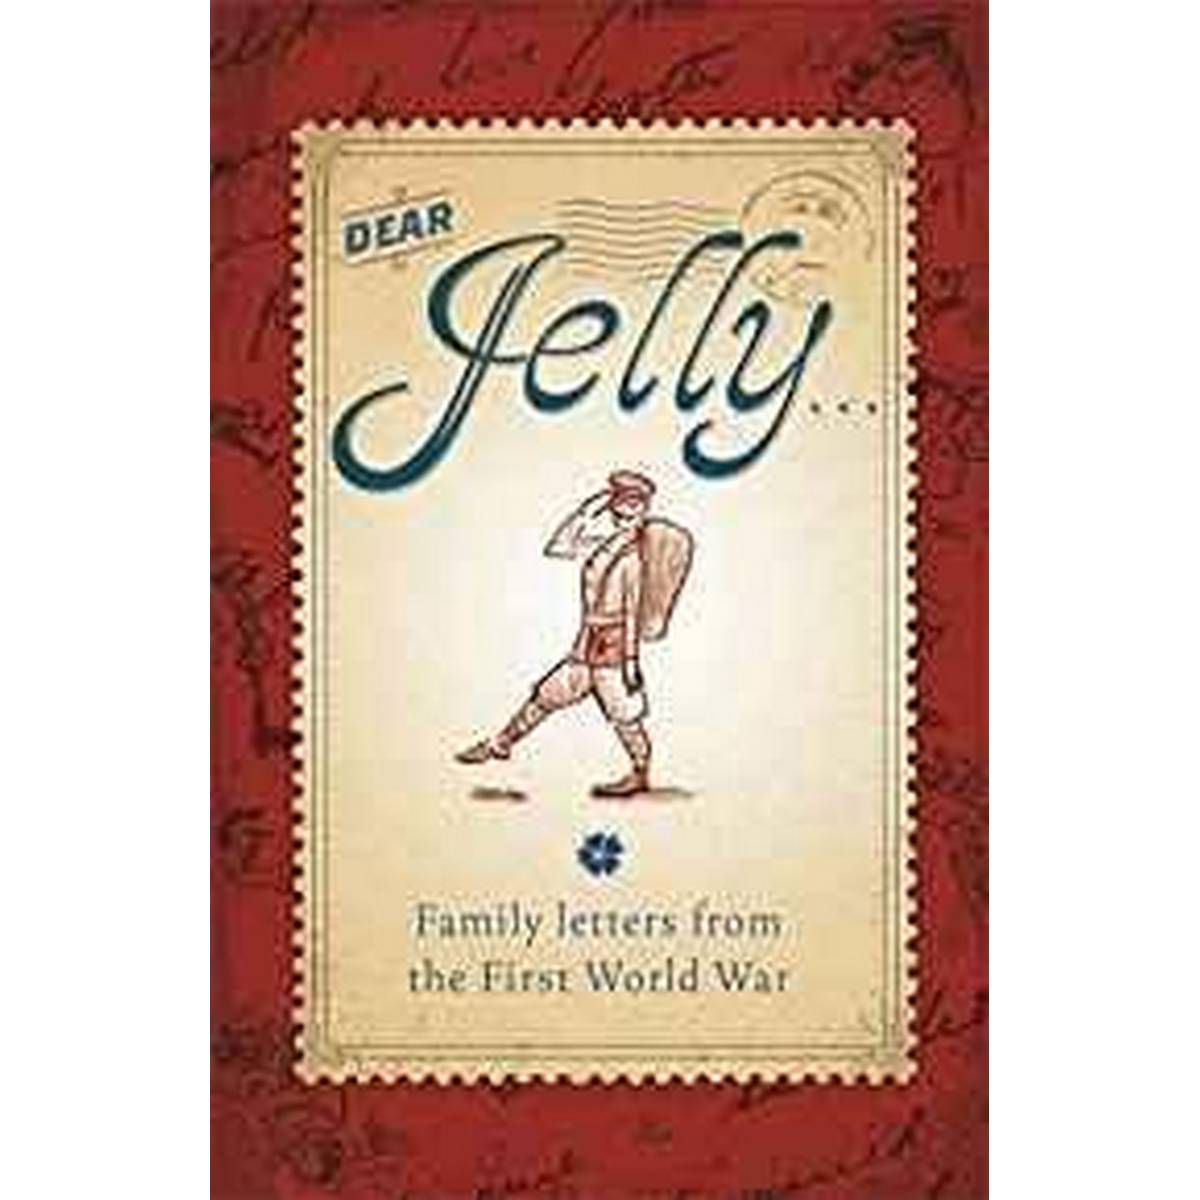 Dear Jelly: Family Letters from the First World War